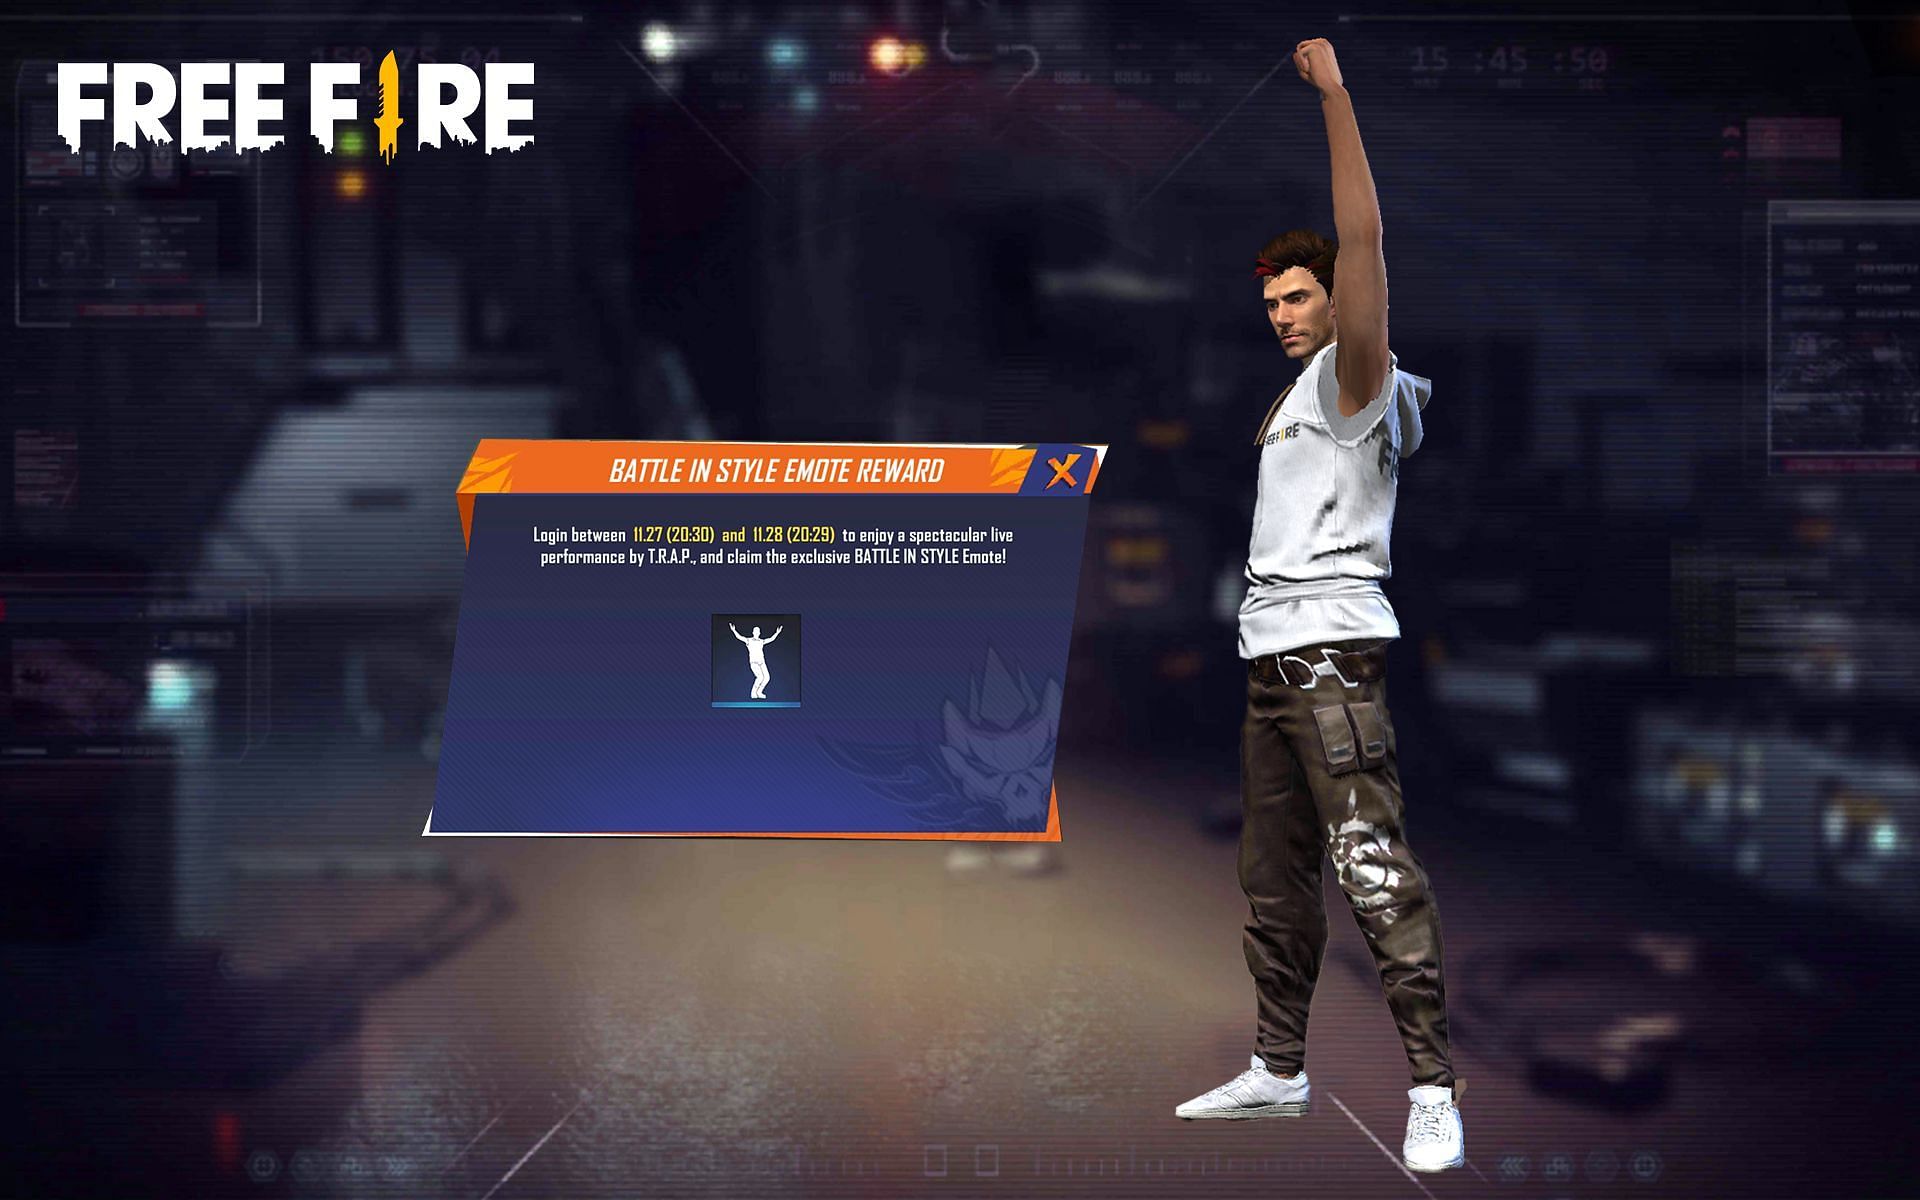 The Battle in Style emote was also available for free (Image via Free Fire)